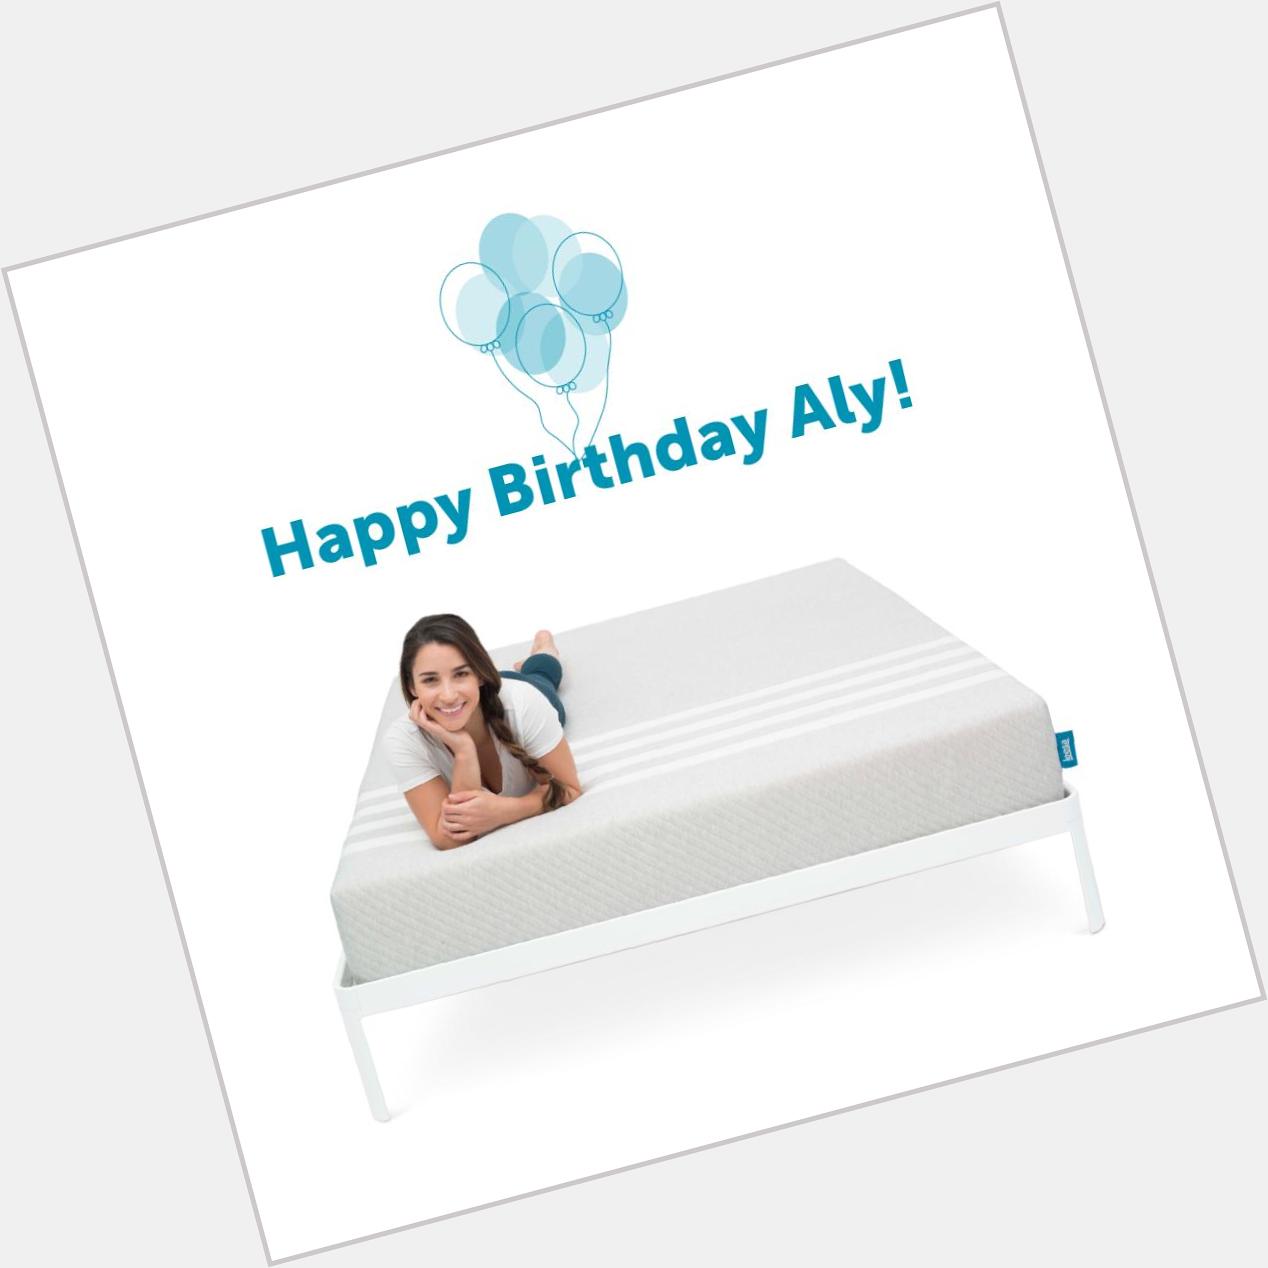 Happy birthday,  We hope your day is full of laughter, love and a really great nap on your Leesa. 